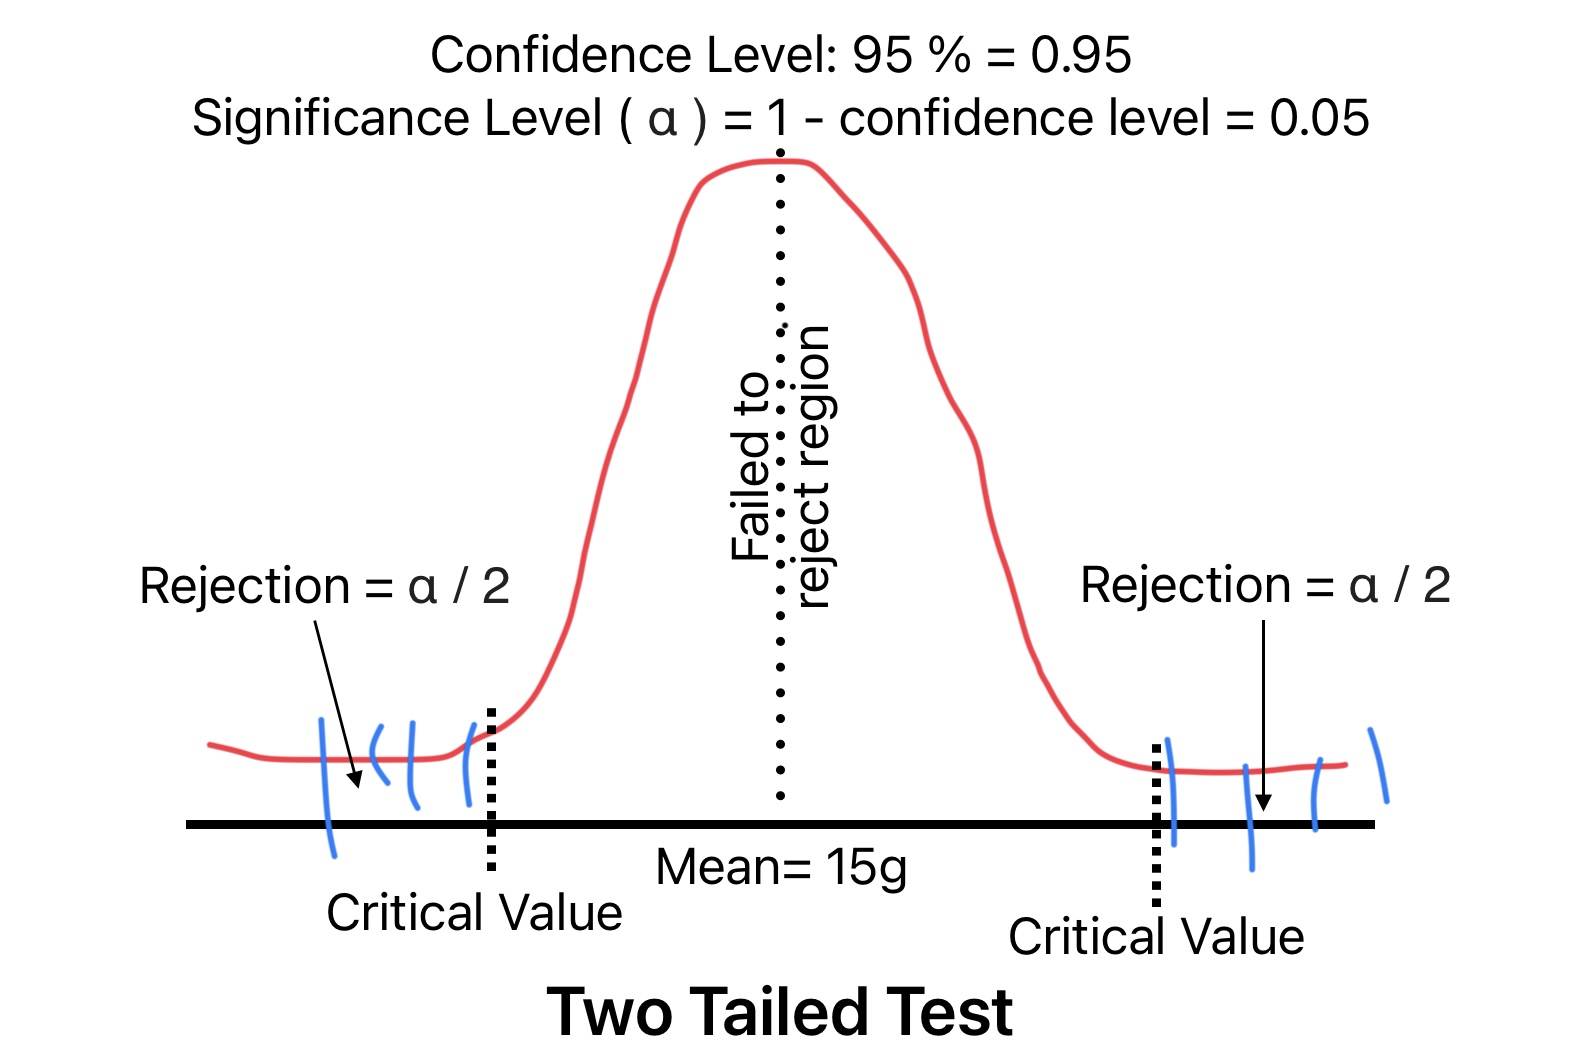 This image shows critical region for Two Tailed Test